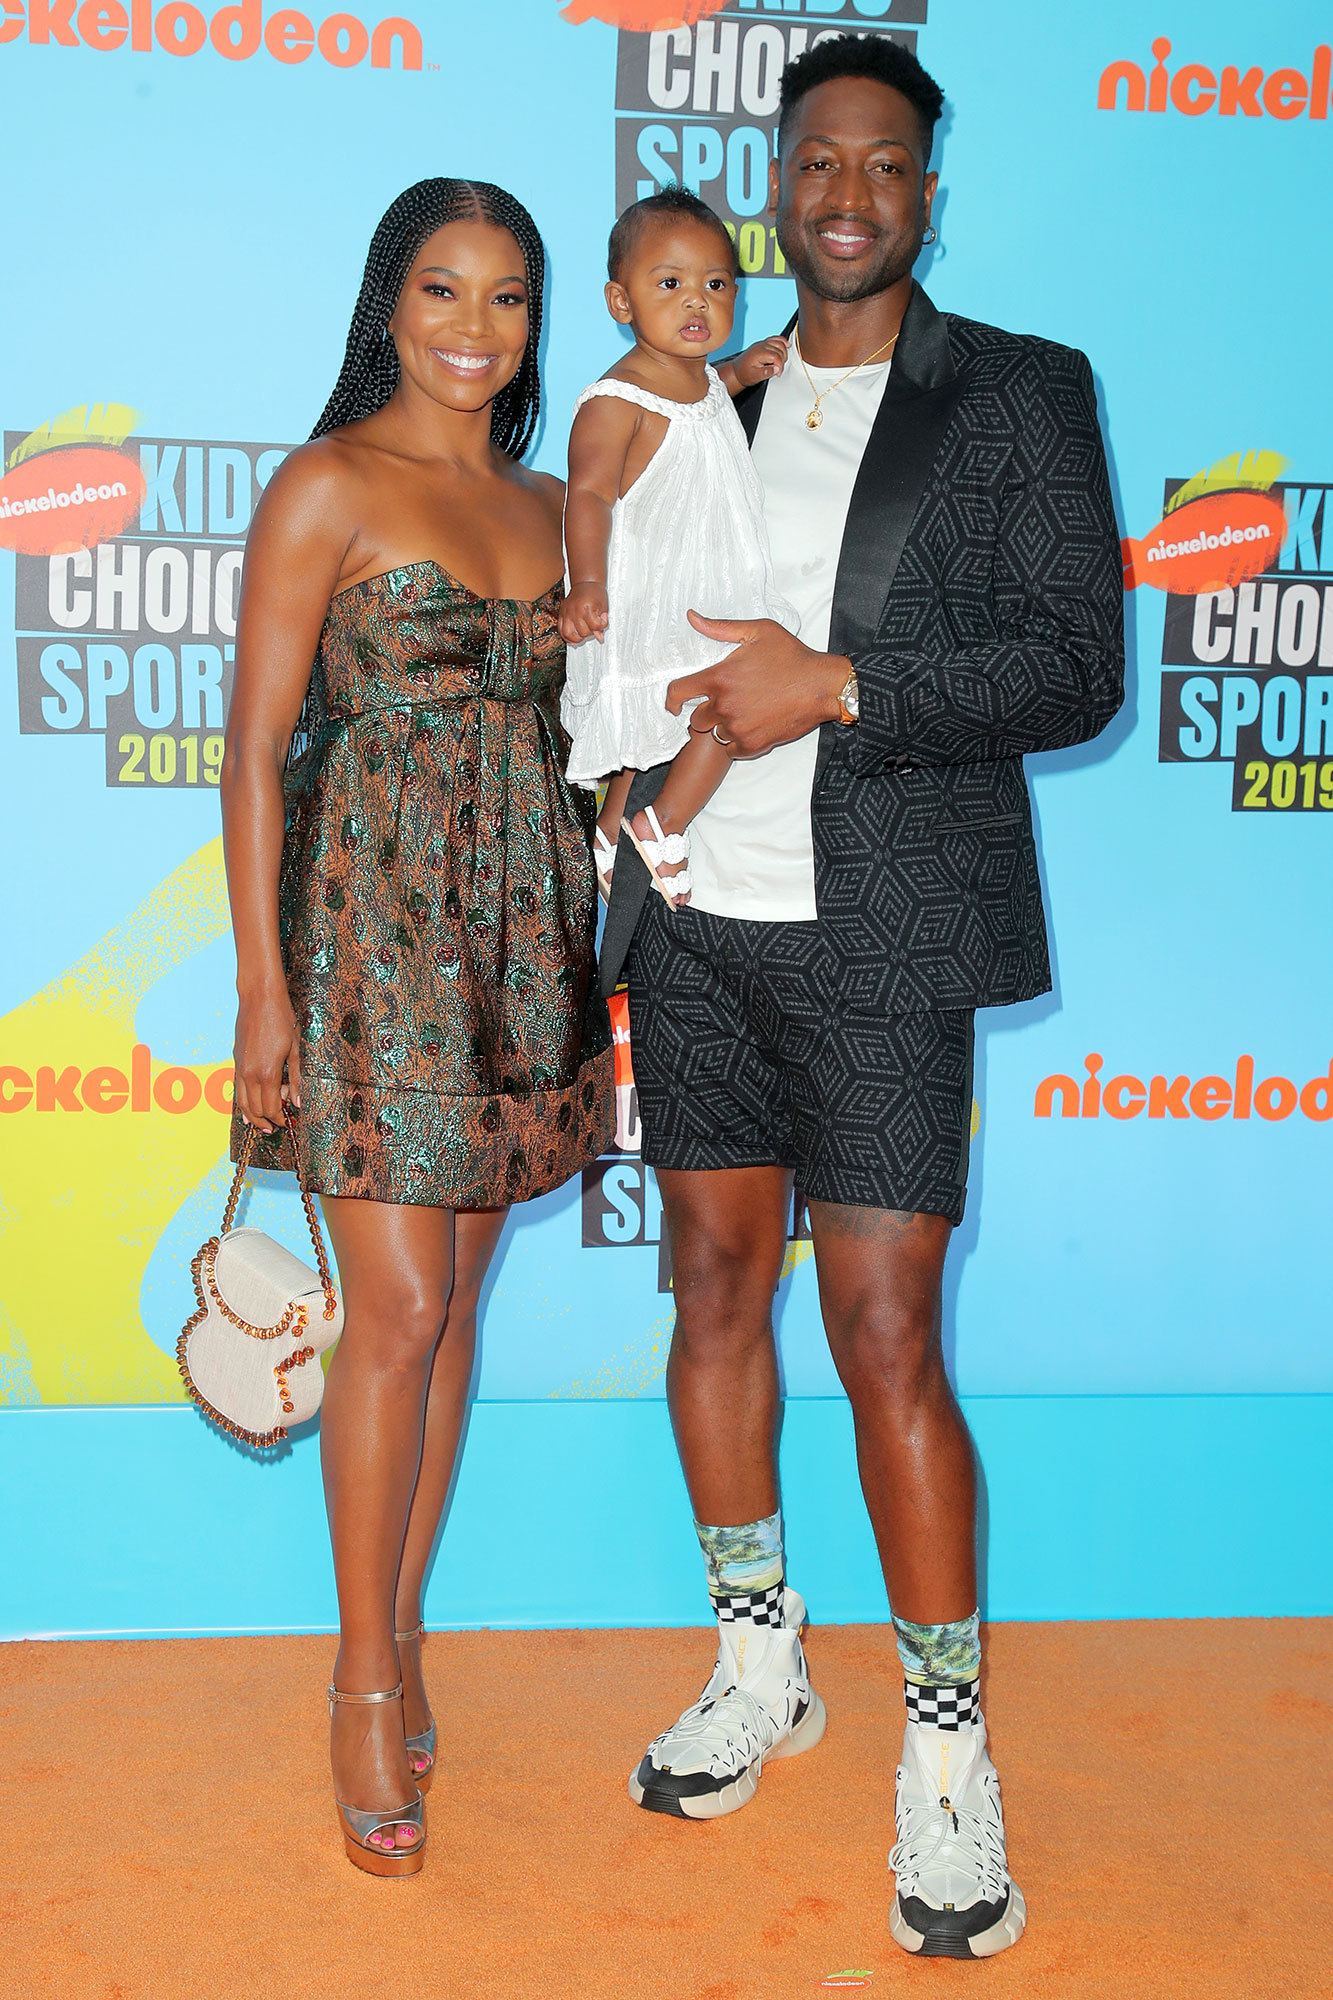 Dwayne Wade and Gabrielle Union Daughter Kaavia Is Our Quarantine Spirit Animal